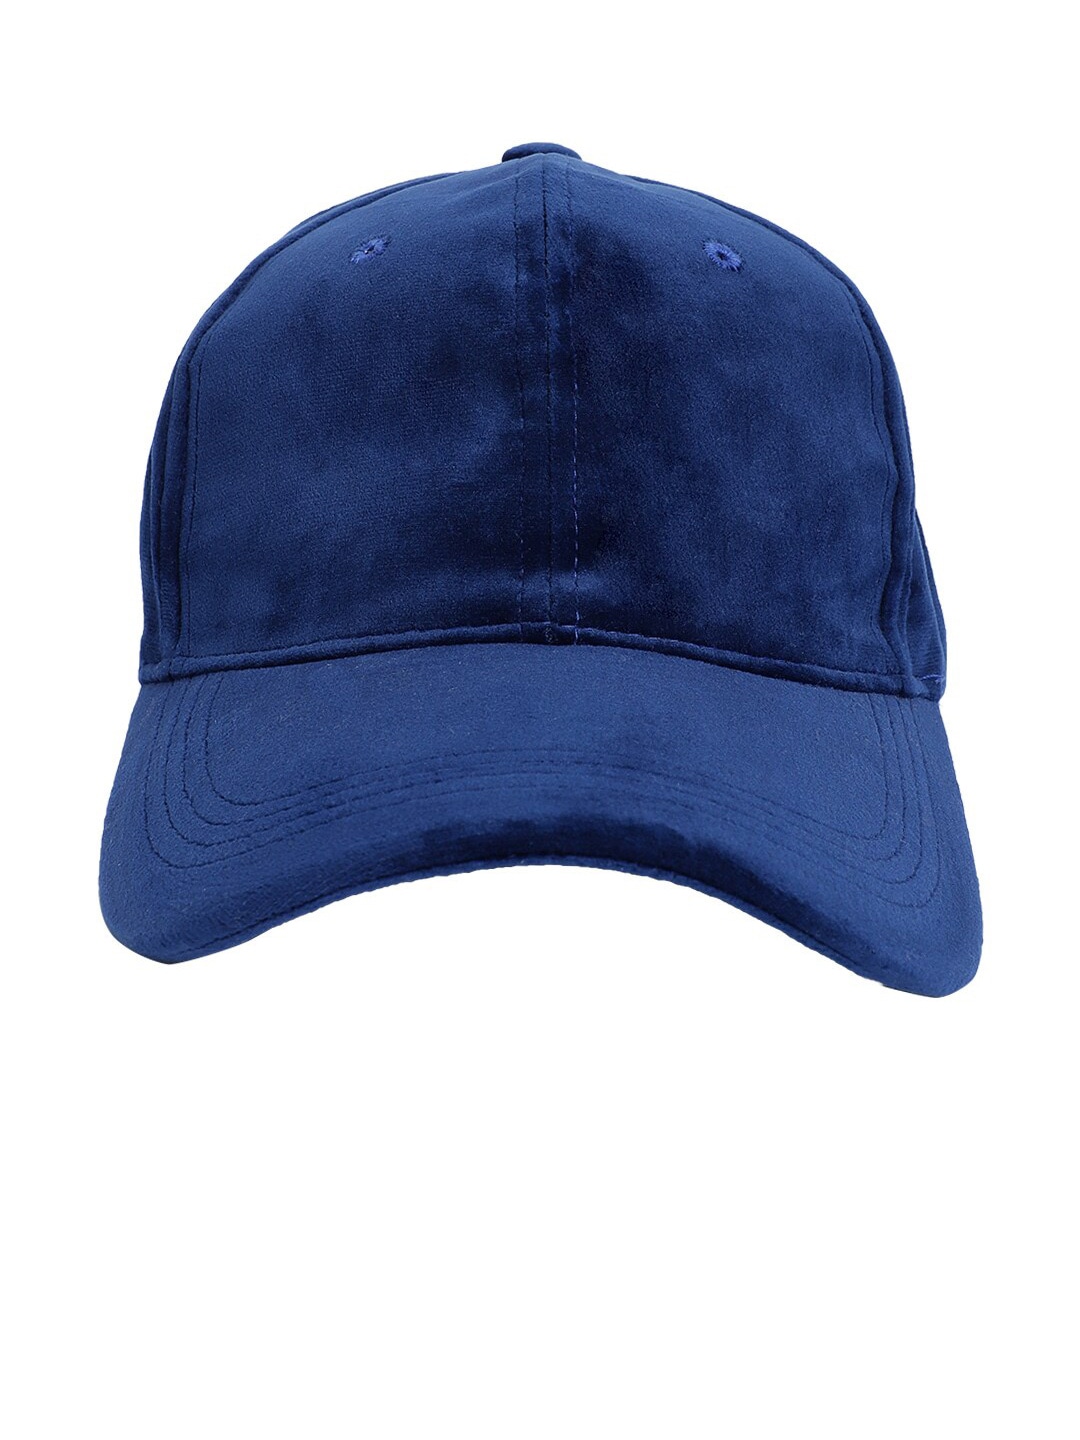 QUIRKY Unisex Navy Blue Baseball Cap Price in India